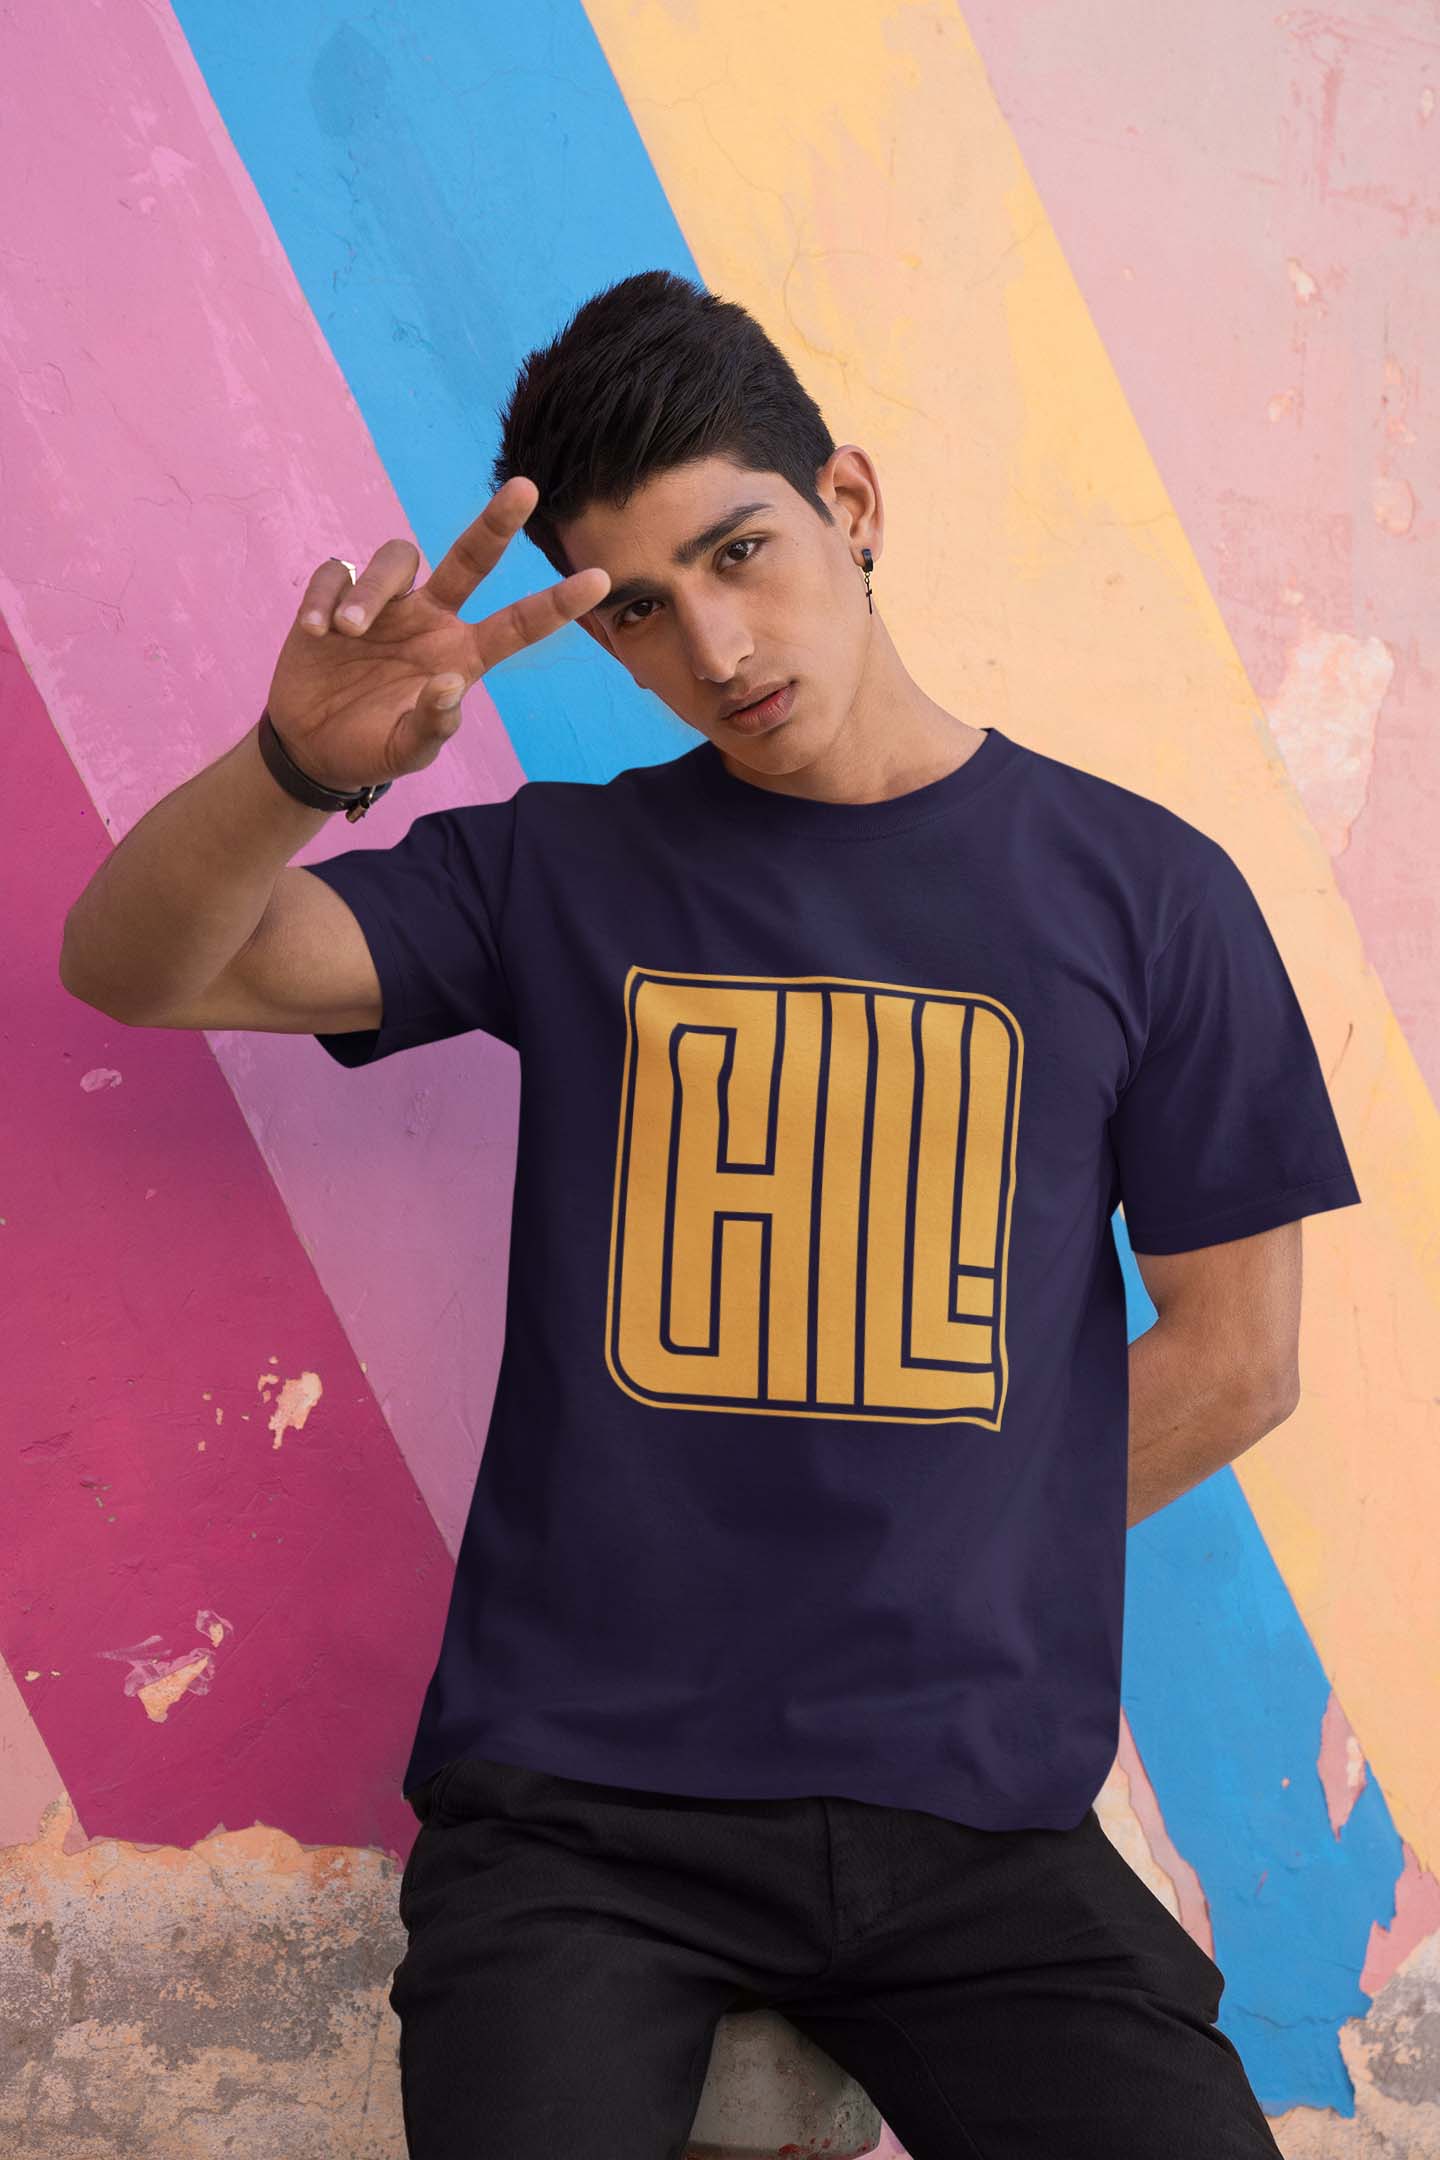 Chill T shirt in Navy Blue